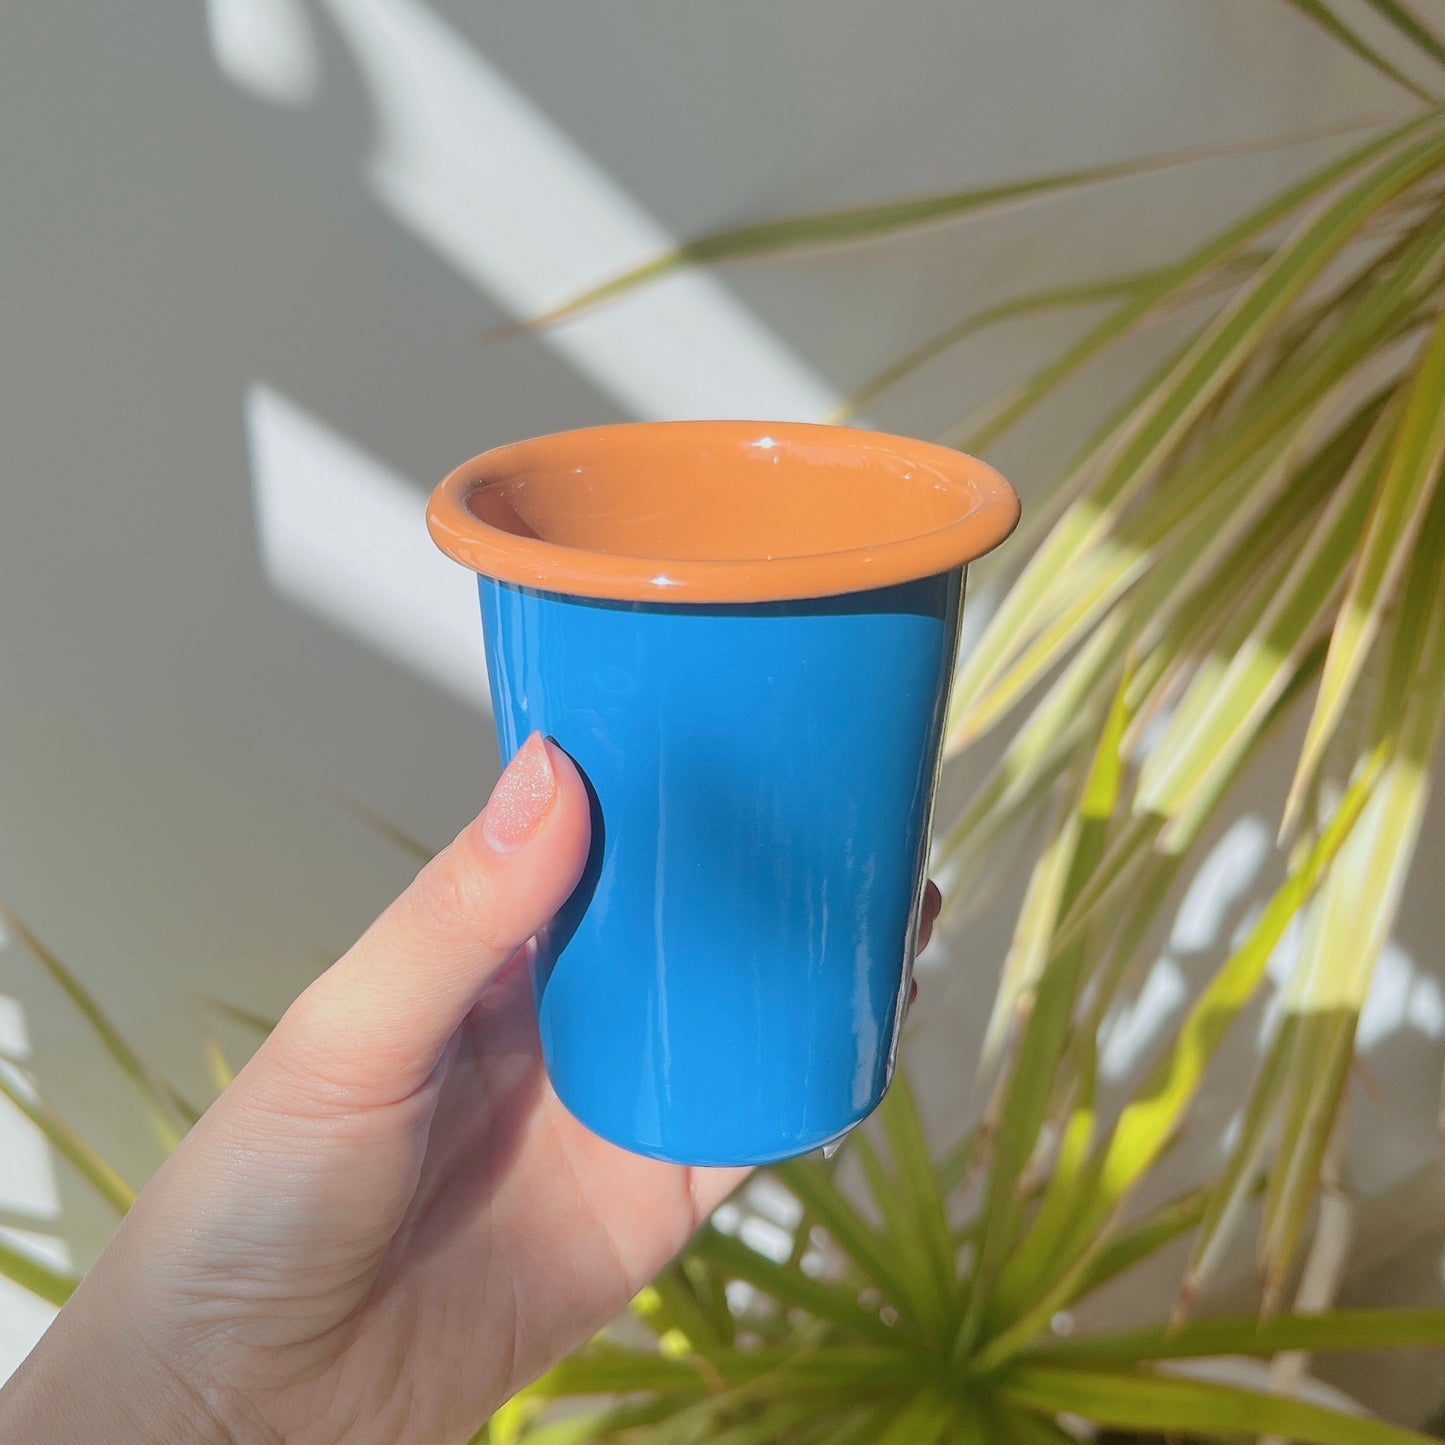 Small Tumbler Get Out - Blue/Brown